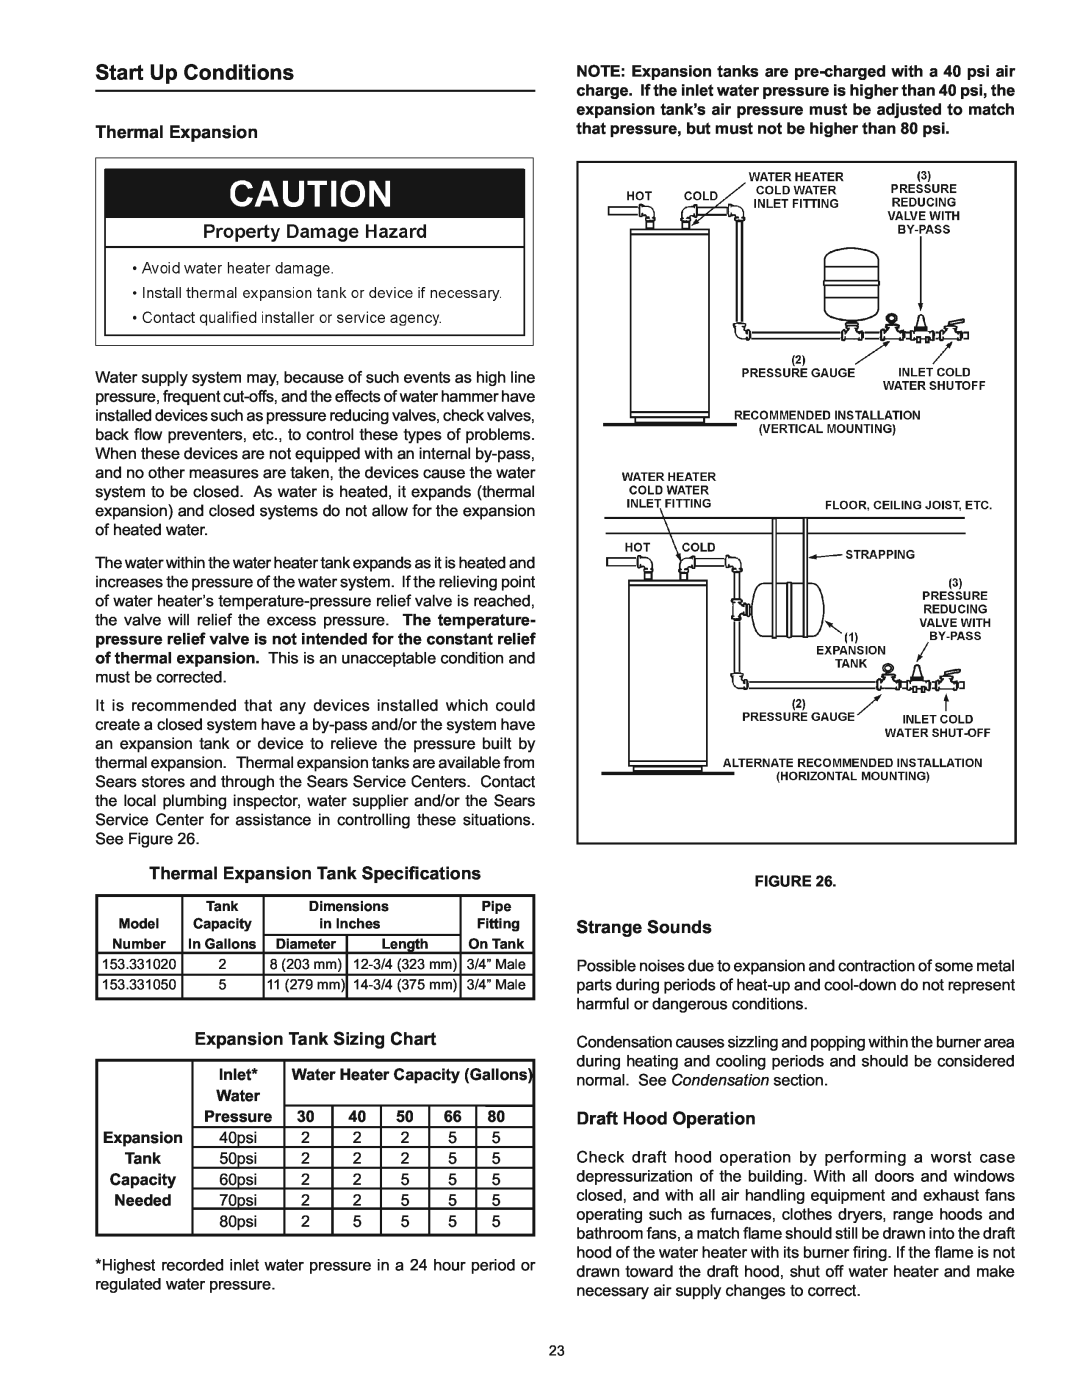 Kenmore 153.33443, 153.33453 Start Up Conditions, Thermal Expansion Tank Speciﬁcations, Expansion Tank Sizing Chart 